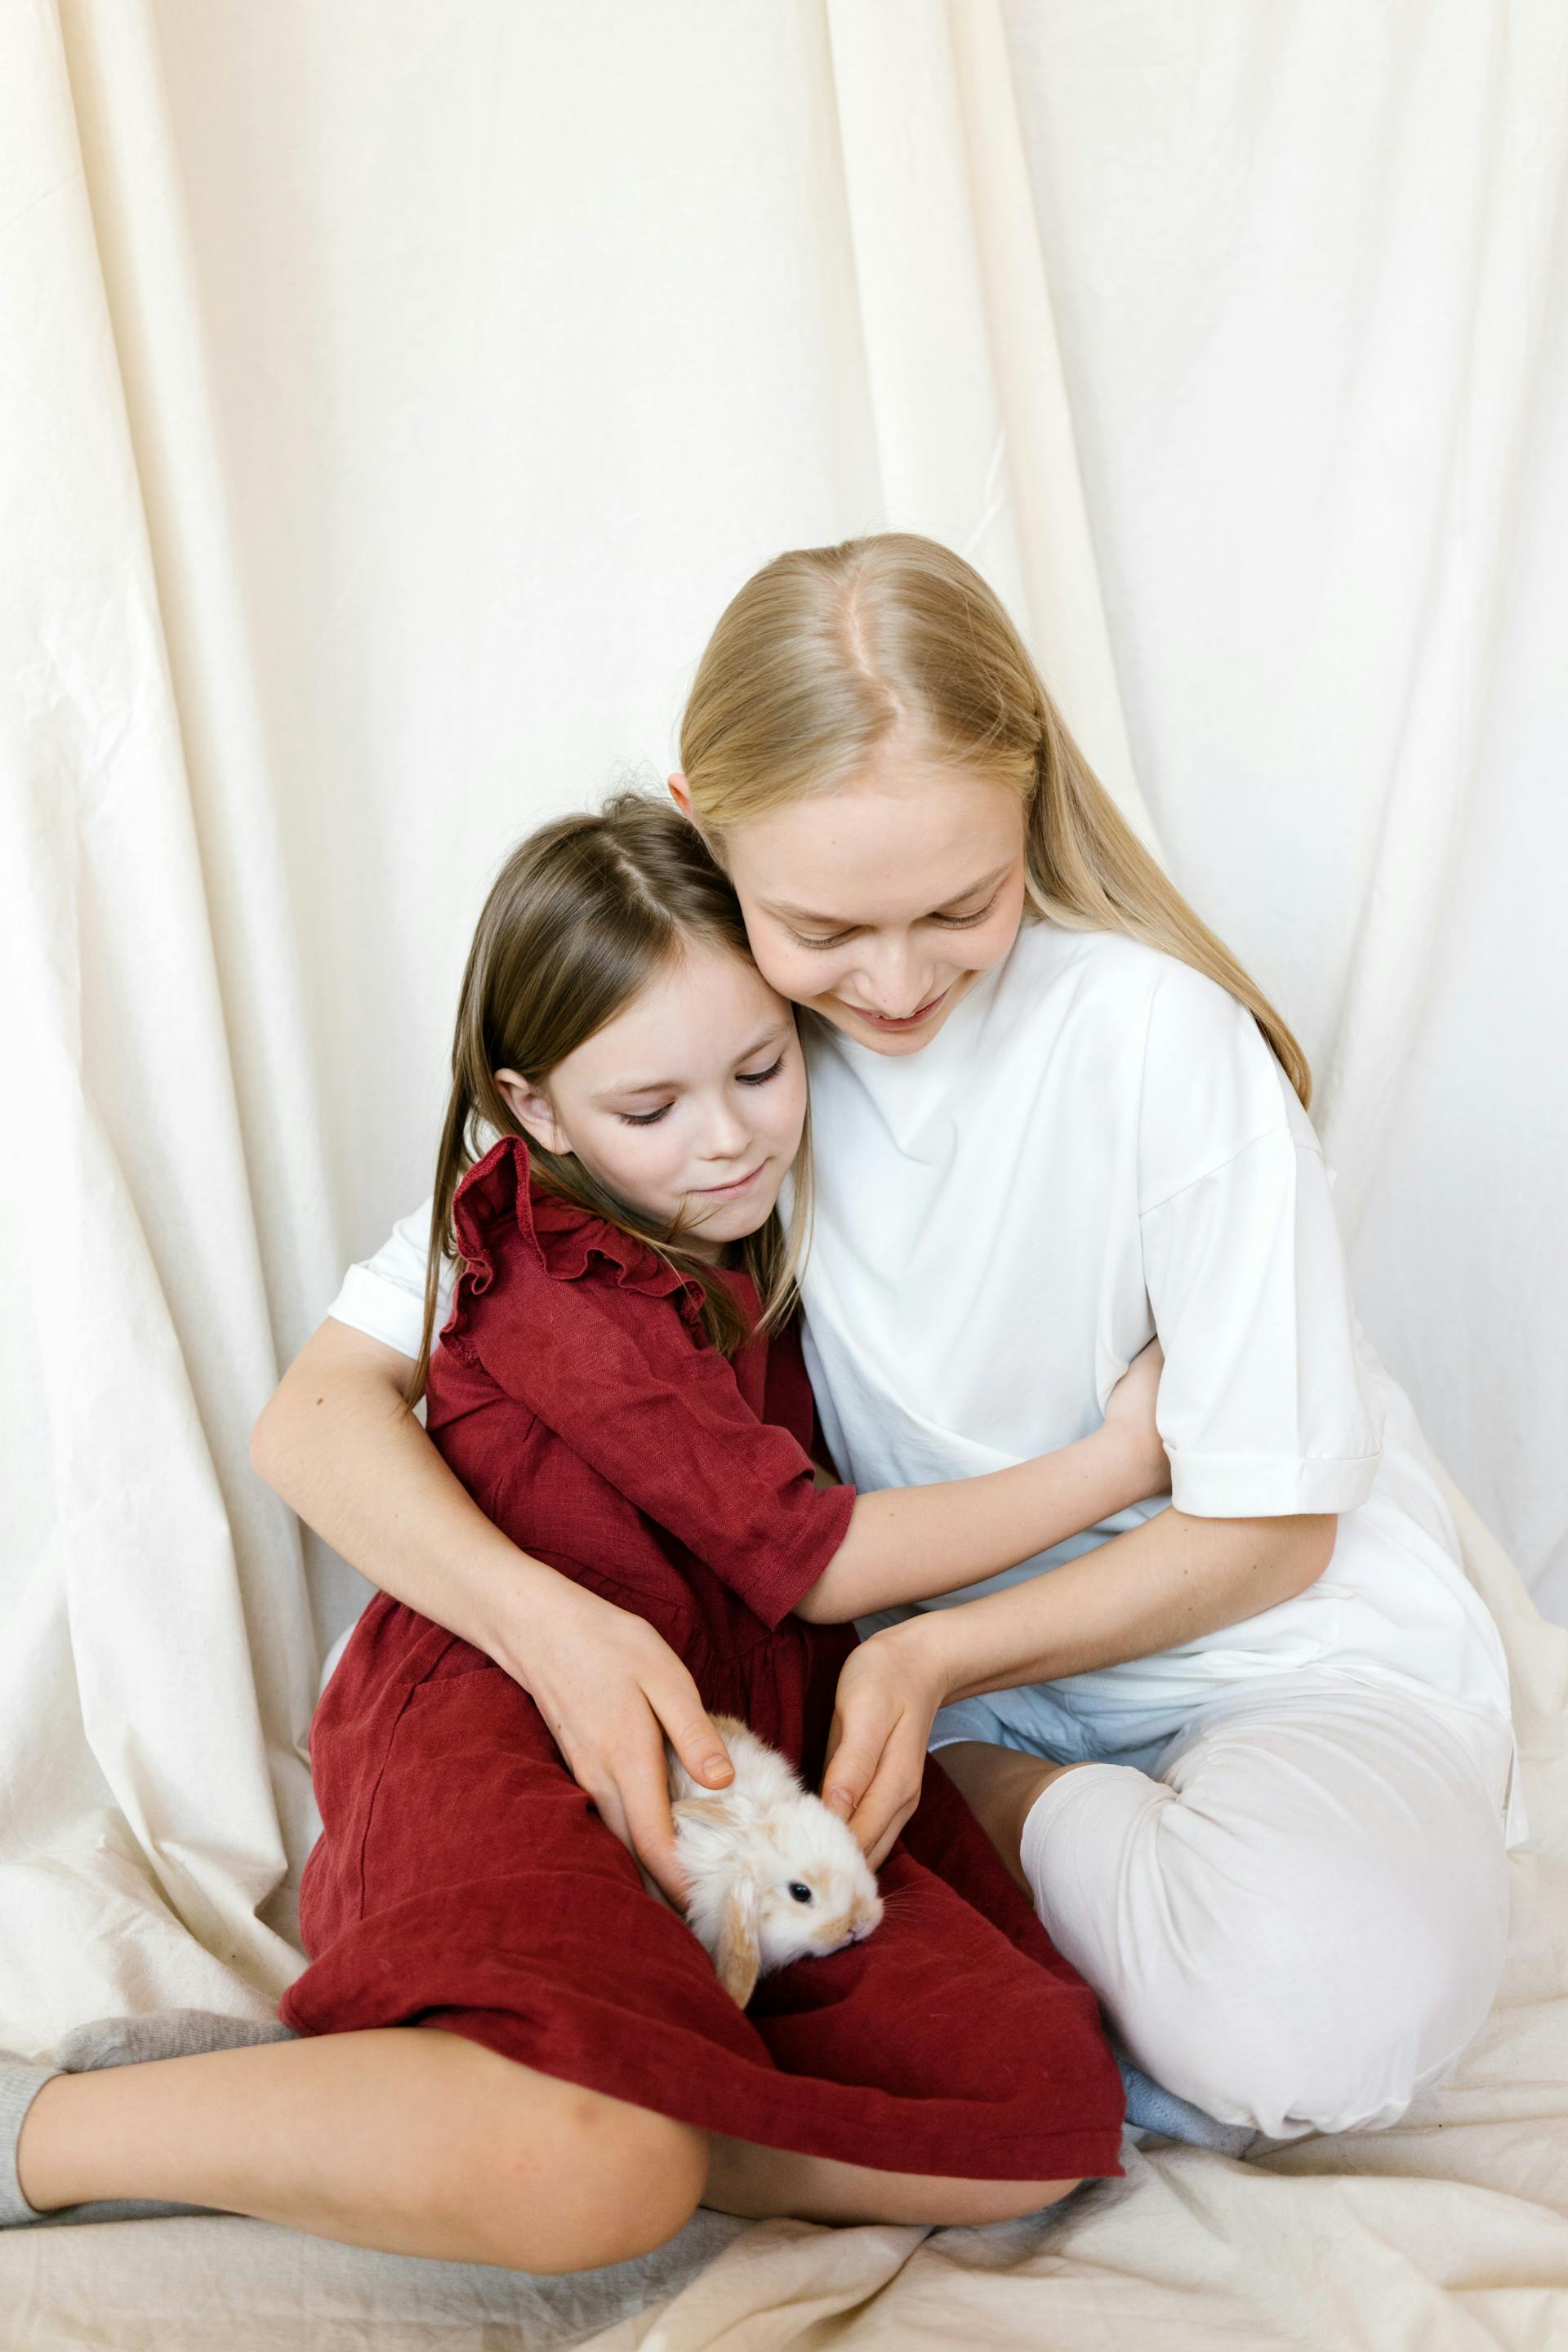 A young girl hugging her mom while looking at a rabbit | Source: Pexels